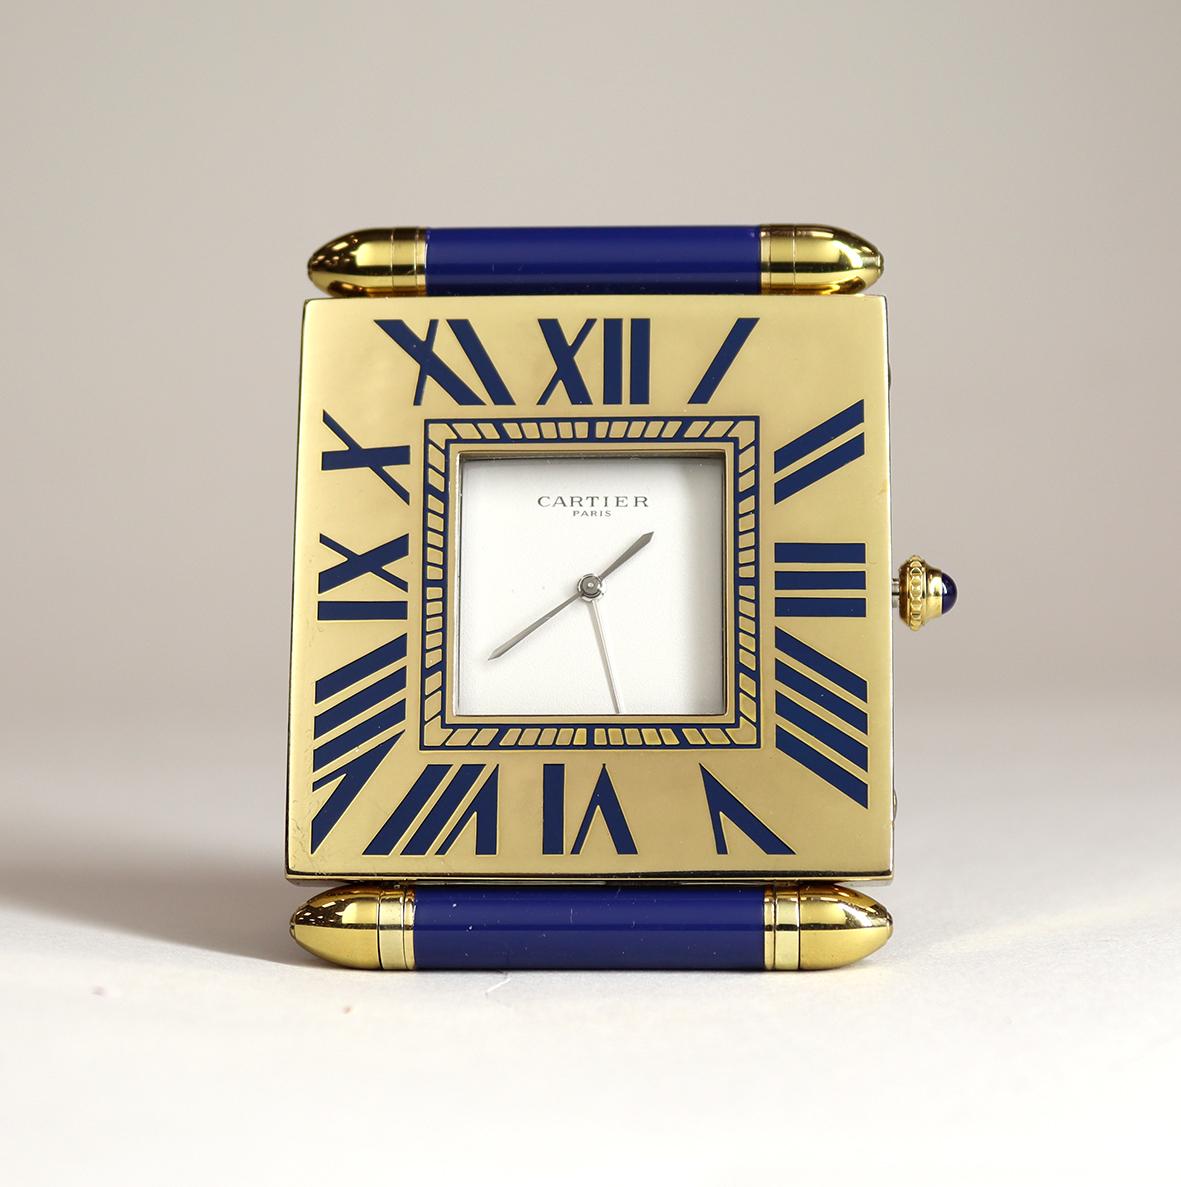 A beautiful ‘as new’ Cartier alarm clock in a gilded folding case with a signed cartier quartz movement and distinctive sapphire cabochon set crown. The foot tolds over and it hinged at the base to cover the dial.

The roman numerals displayed